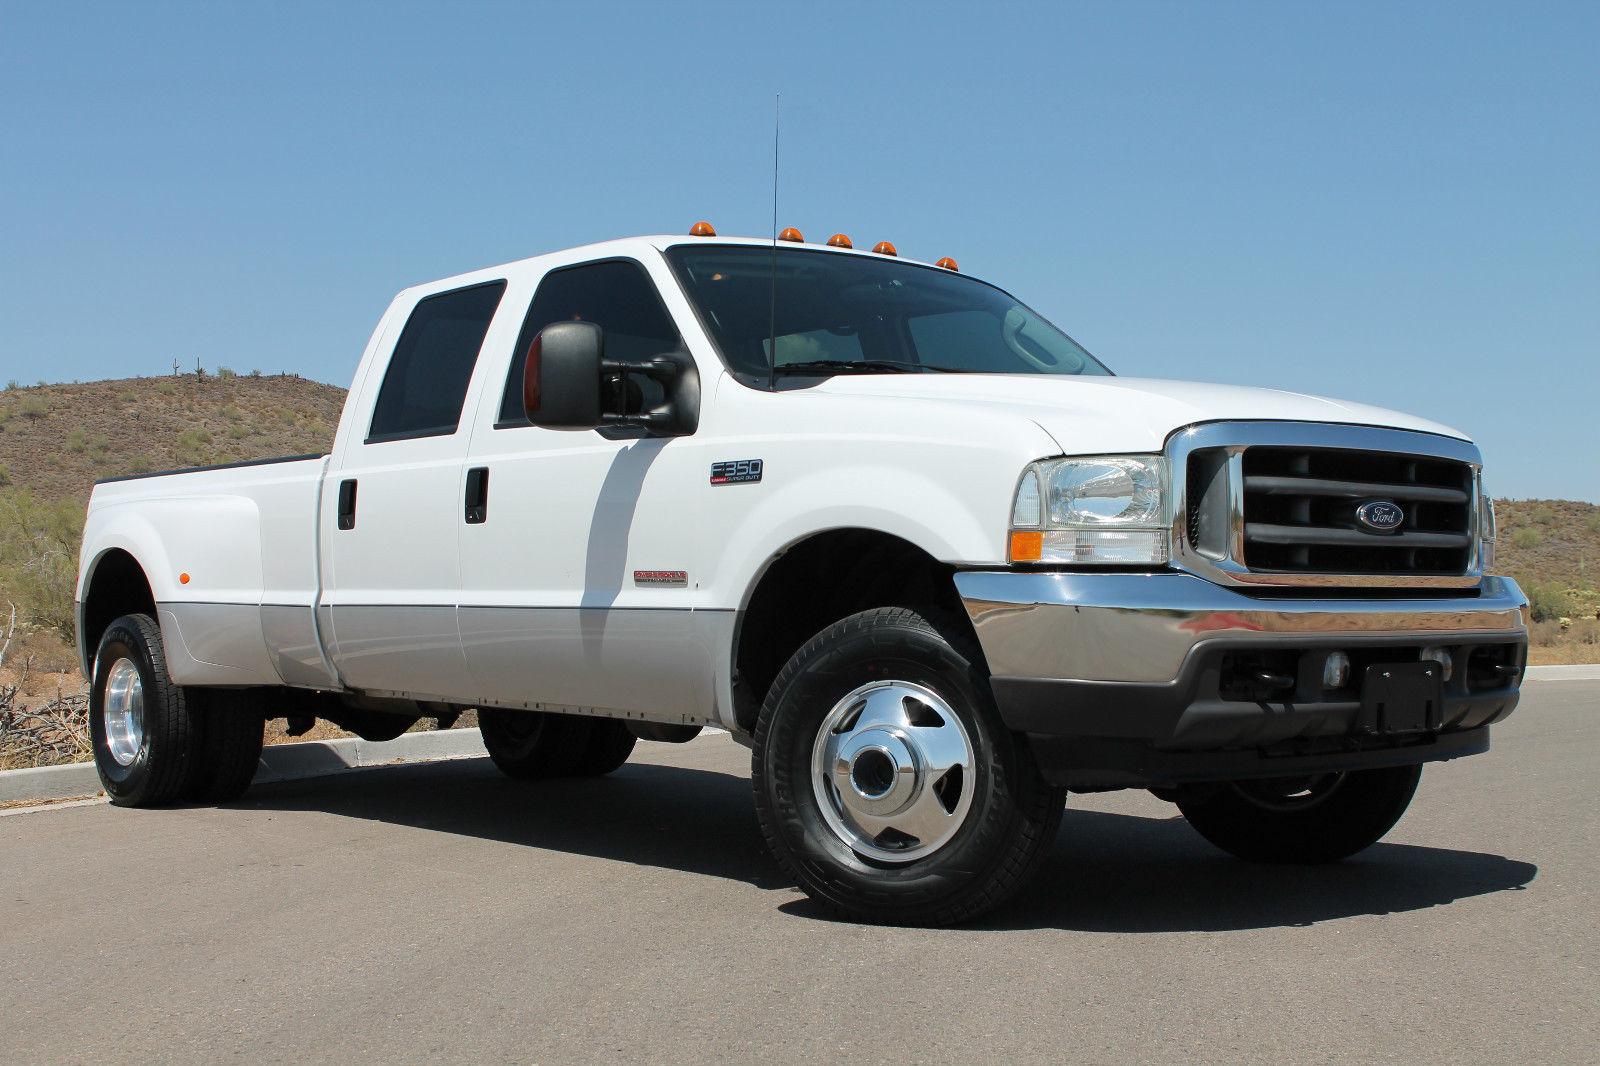 2003 Ford F 350 Dually CREW CAB LARIAT for sale 2003 Ford F350 Dually 7.3 Diesel Towing Capacity